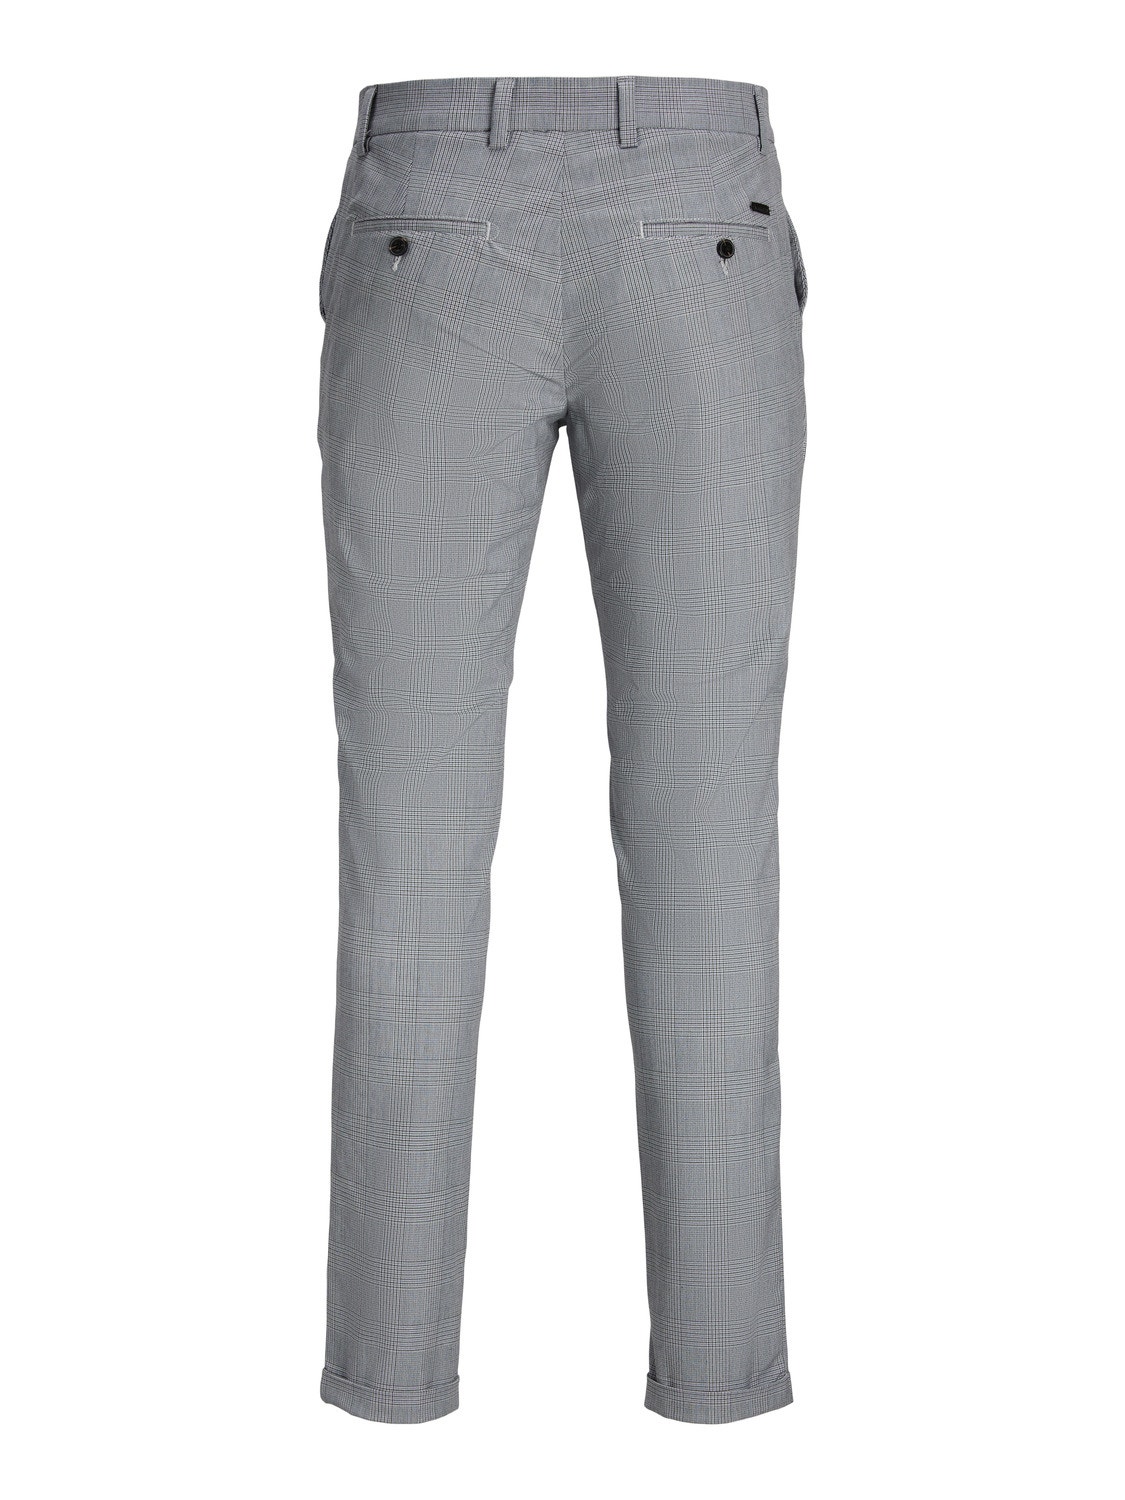 Slim Fit Chino trousers with 30% discount! | Jack & Jones®